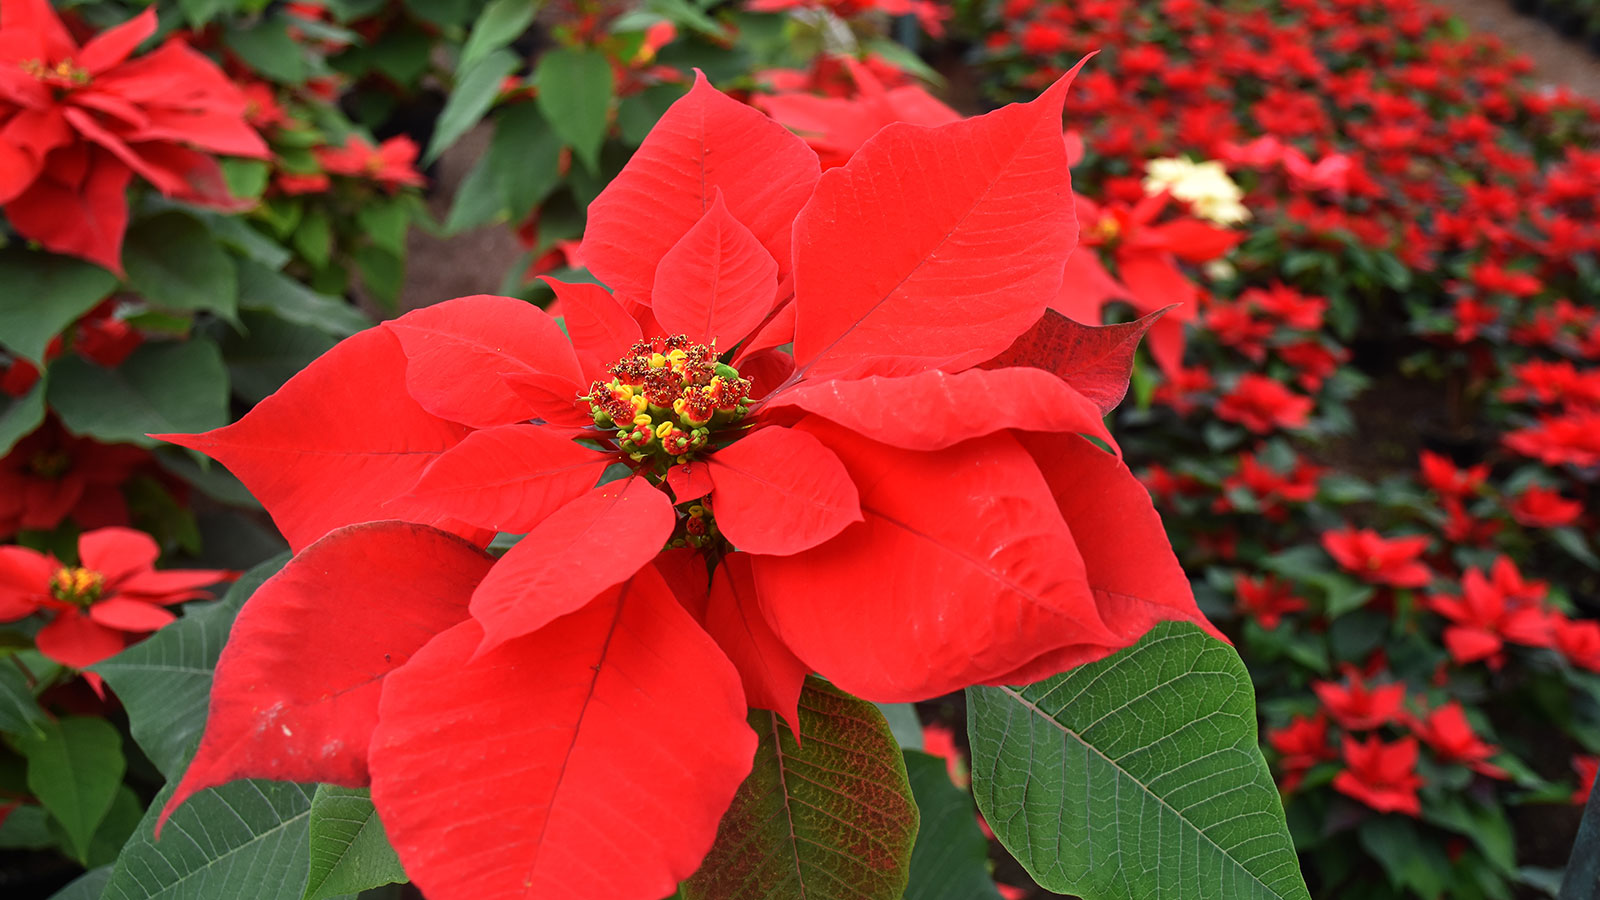 What Traditional Christmas Plant Is Native To Mexico?